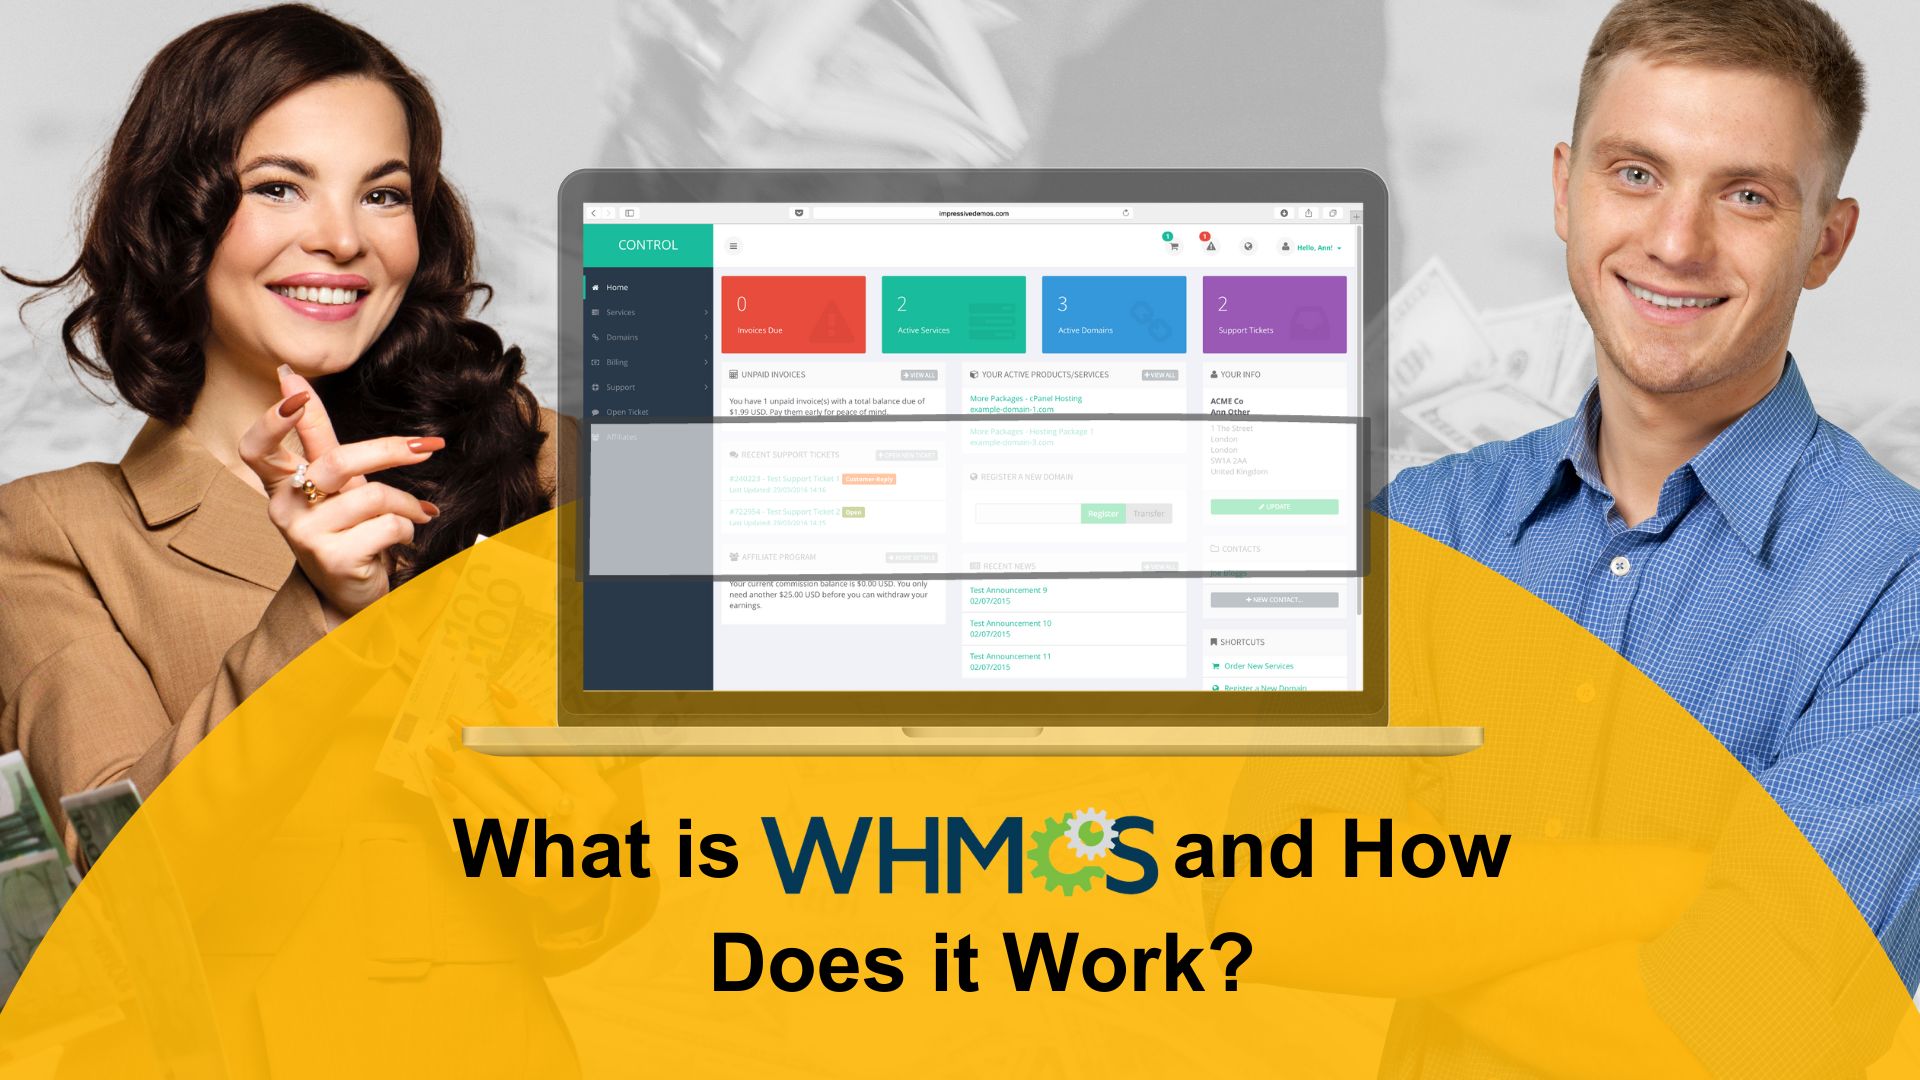 What is WHMCS and How Does it Work?